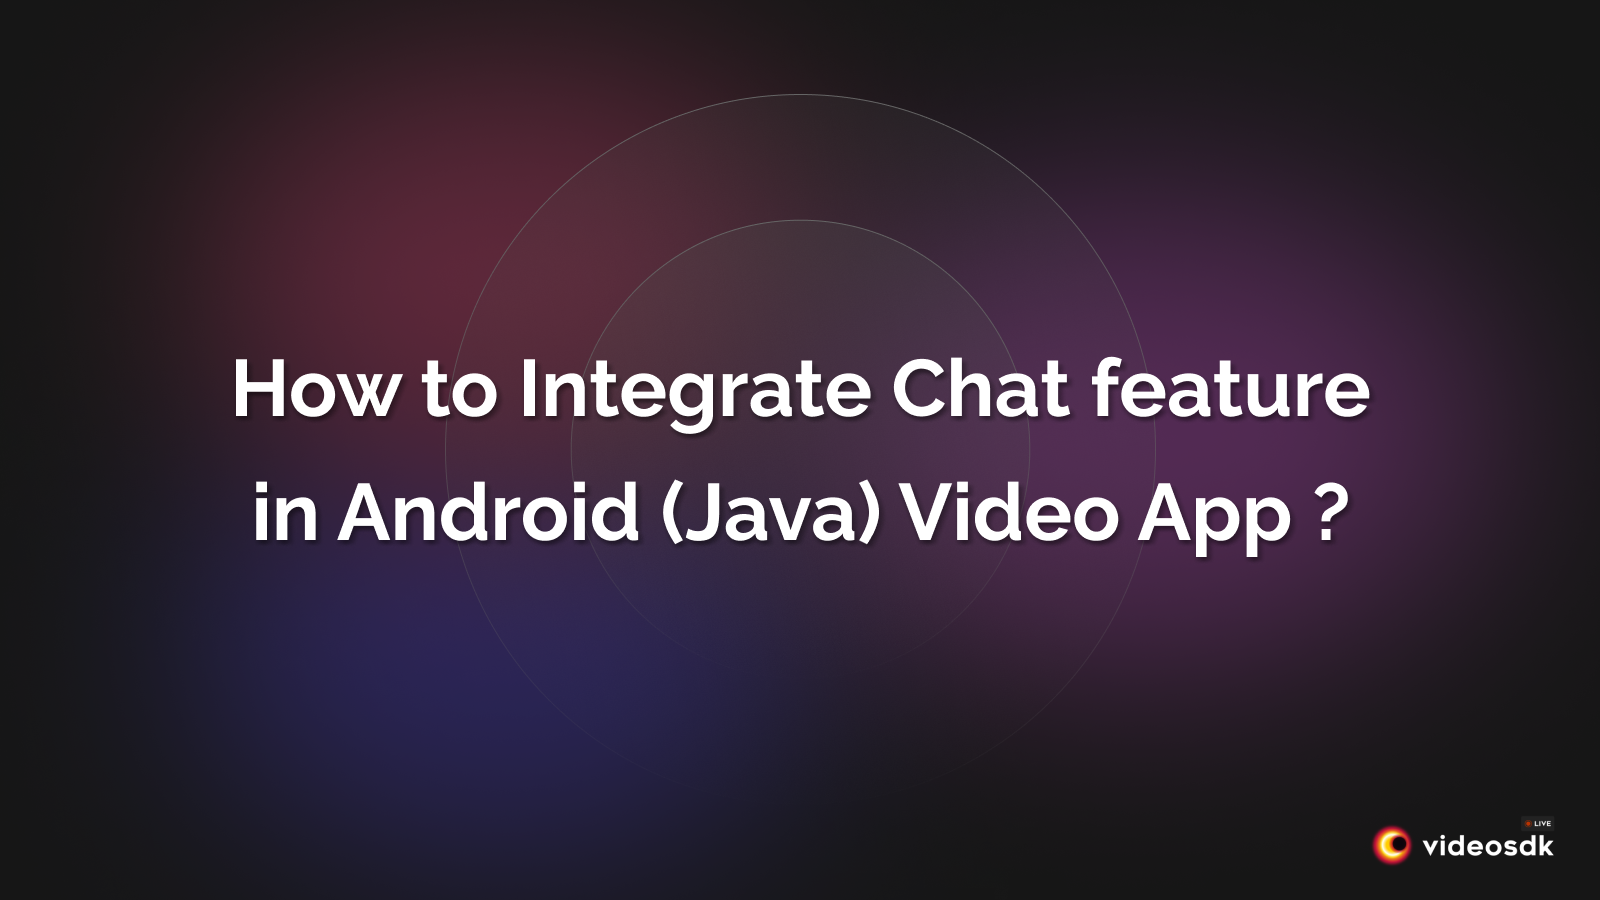 How to Integrate Chat Feature in Android(Java) Video Call App?